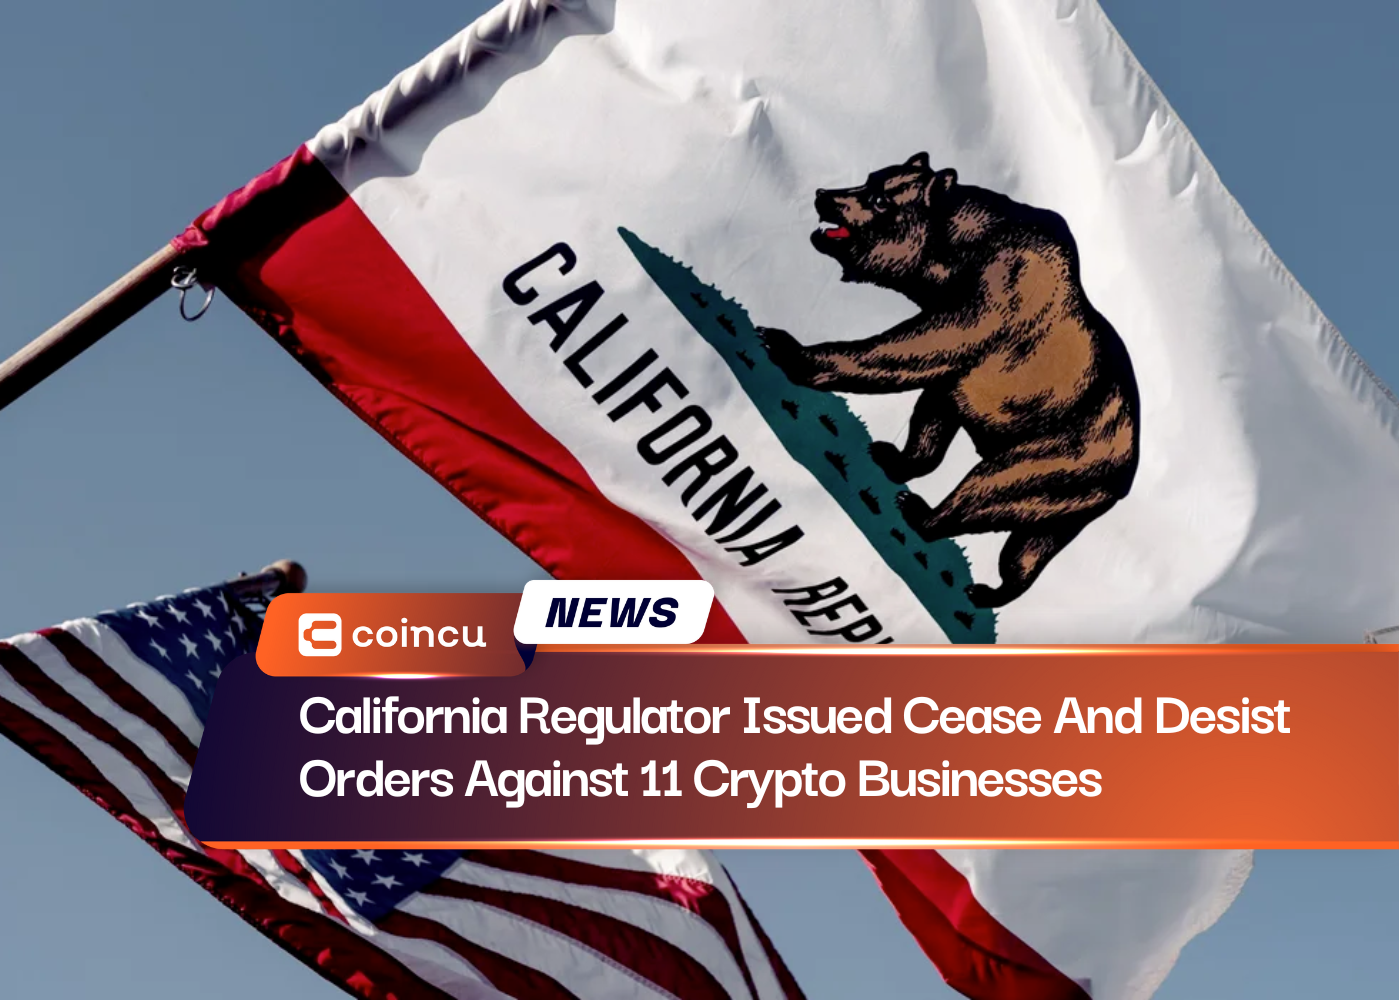 California Regulator Issued Cease And Desist Orders Against 11 Crypto Businesses